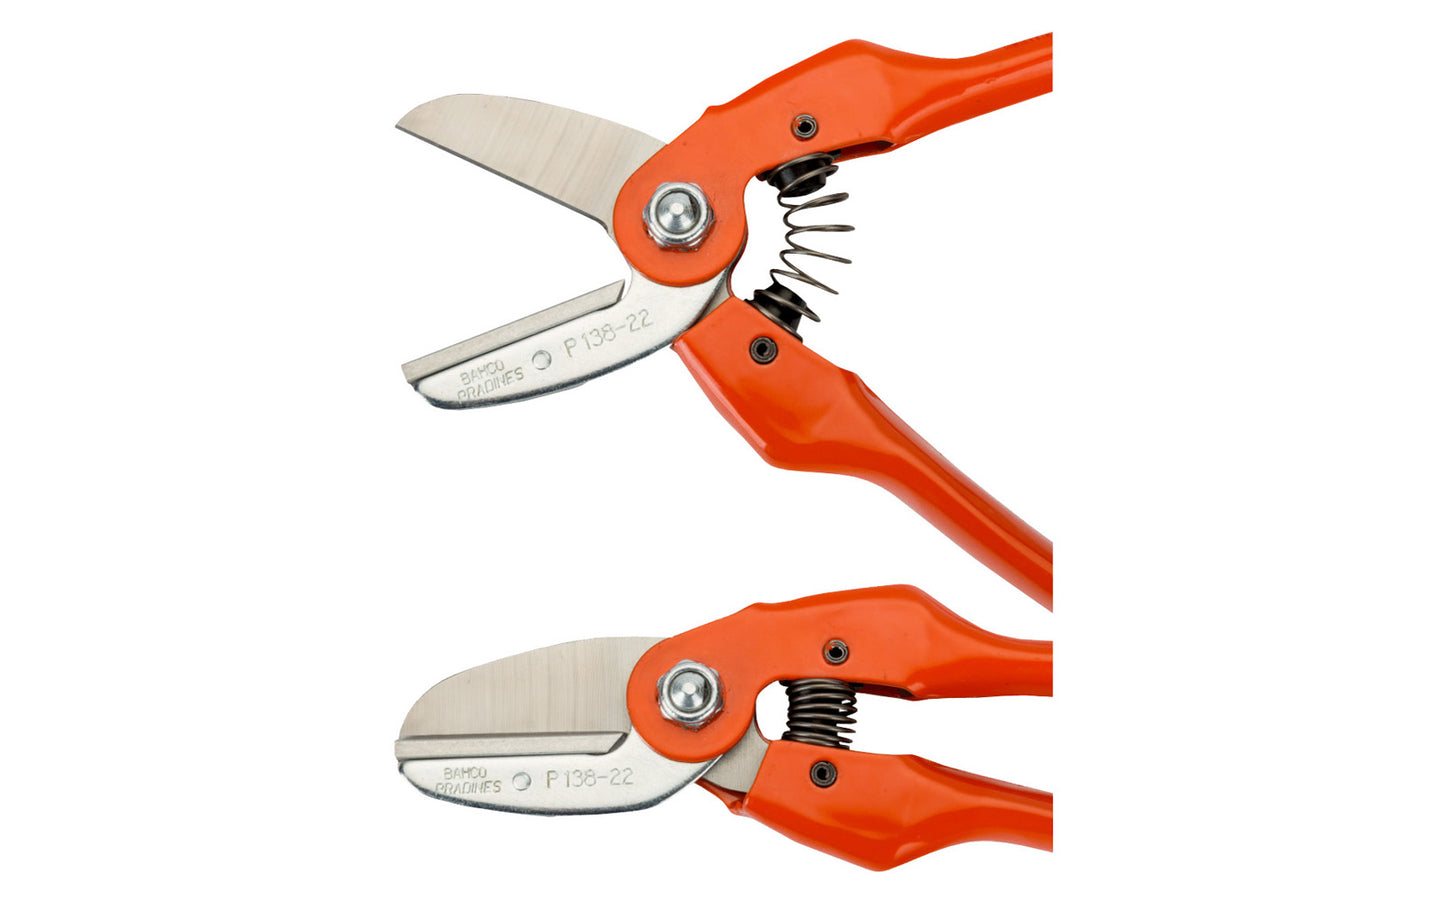 These Bahco Anvil Pruners with Steel Handle have a double-bevelled blade that's fully-hardened. The aluminum anvil which supports branch and spreads the pressure reducing damage. Stamped pressed steel handles. 3/4" (20 mm) cutting diameter max. Made in France. 3/4" (20 mm) cutting diameter max. 7311518301279